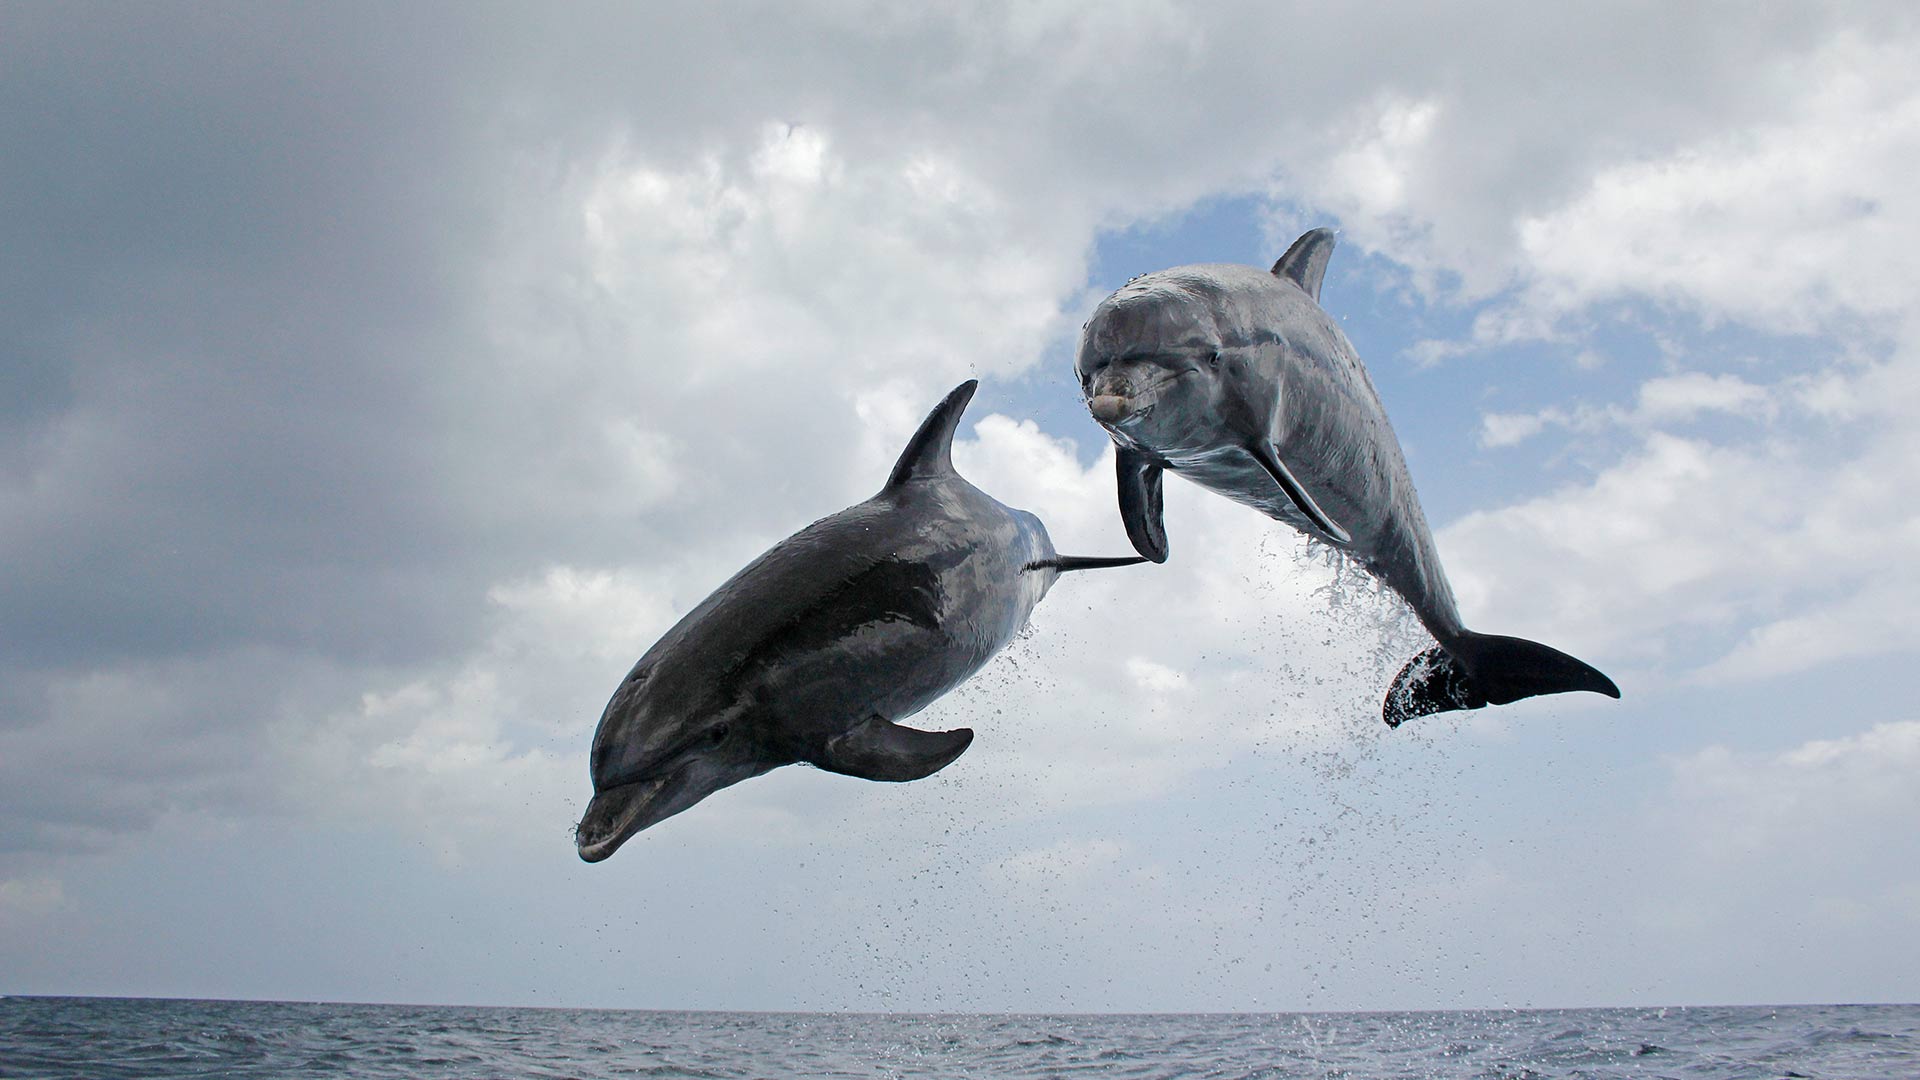 Jumping pair of bottlenose dolphins.